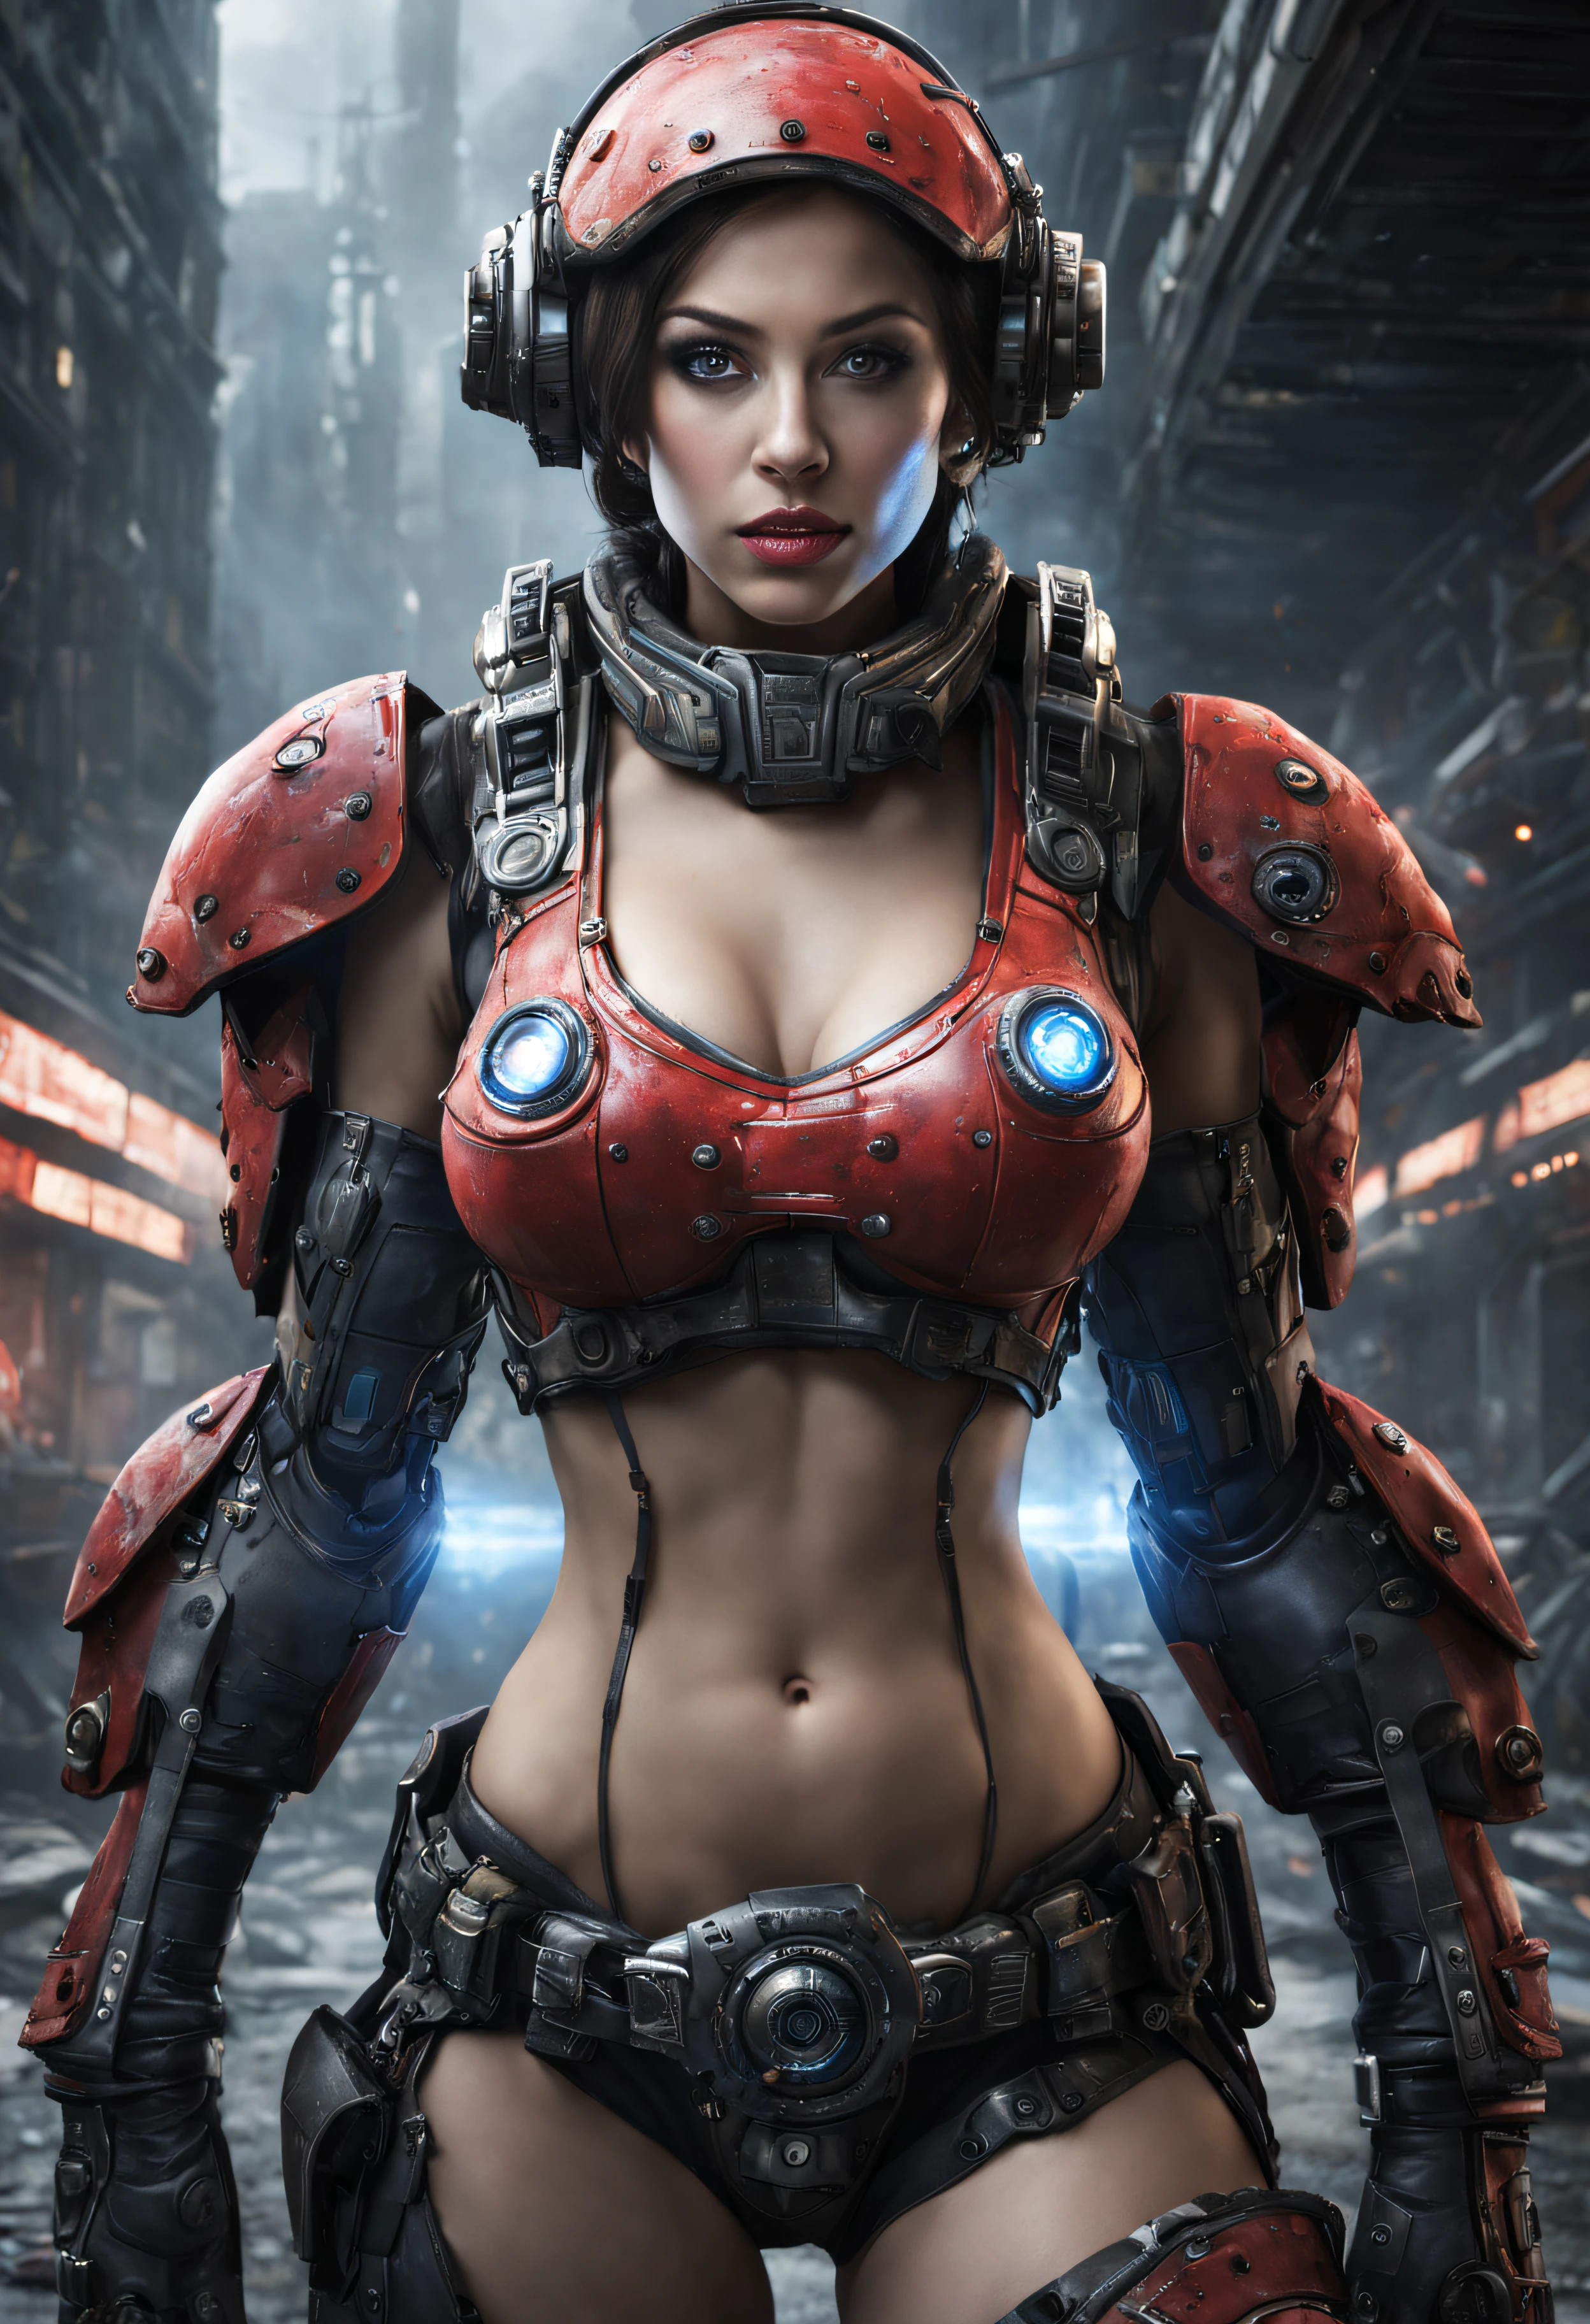 extraterrestrial alien woman, Considered one of the most beautiful races in the galaxy, with a face, sensual eyes and lips, dressed in sexy gears of war uniform, It is located in the space station control center. hyperrealistic, sharp image, 8k.